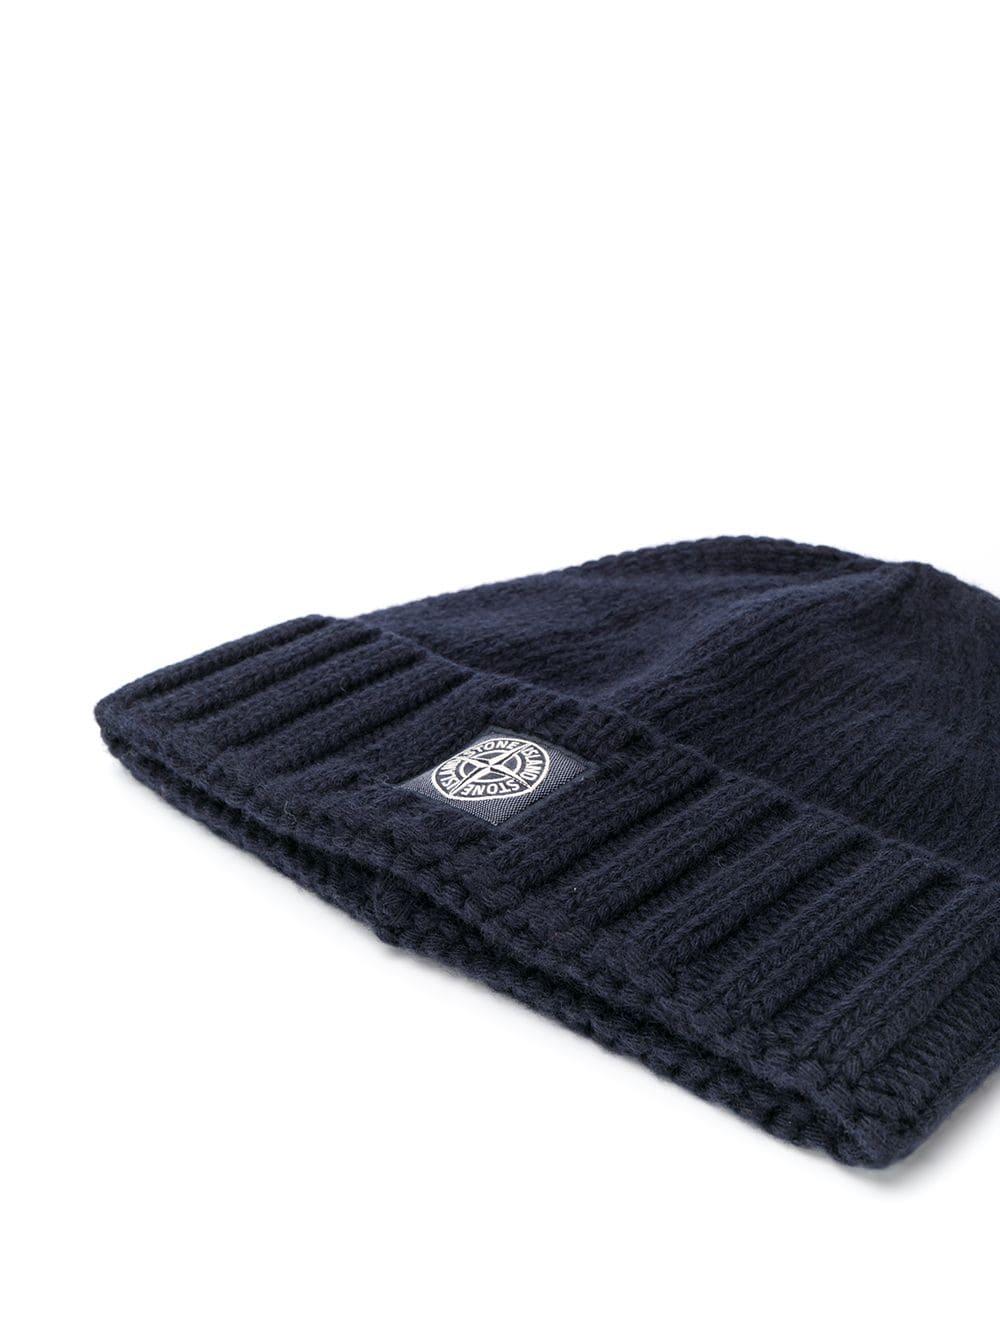 Stone Island Wool Compass Badge Beanie in Blue for Men - Lyst